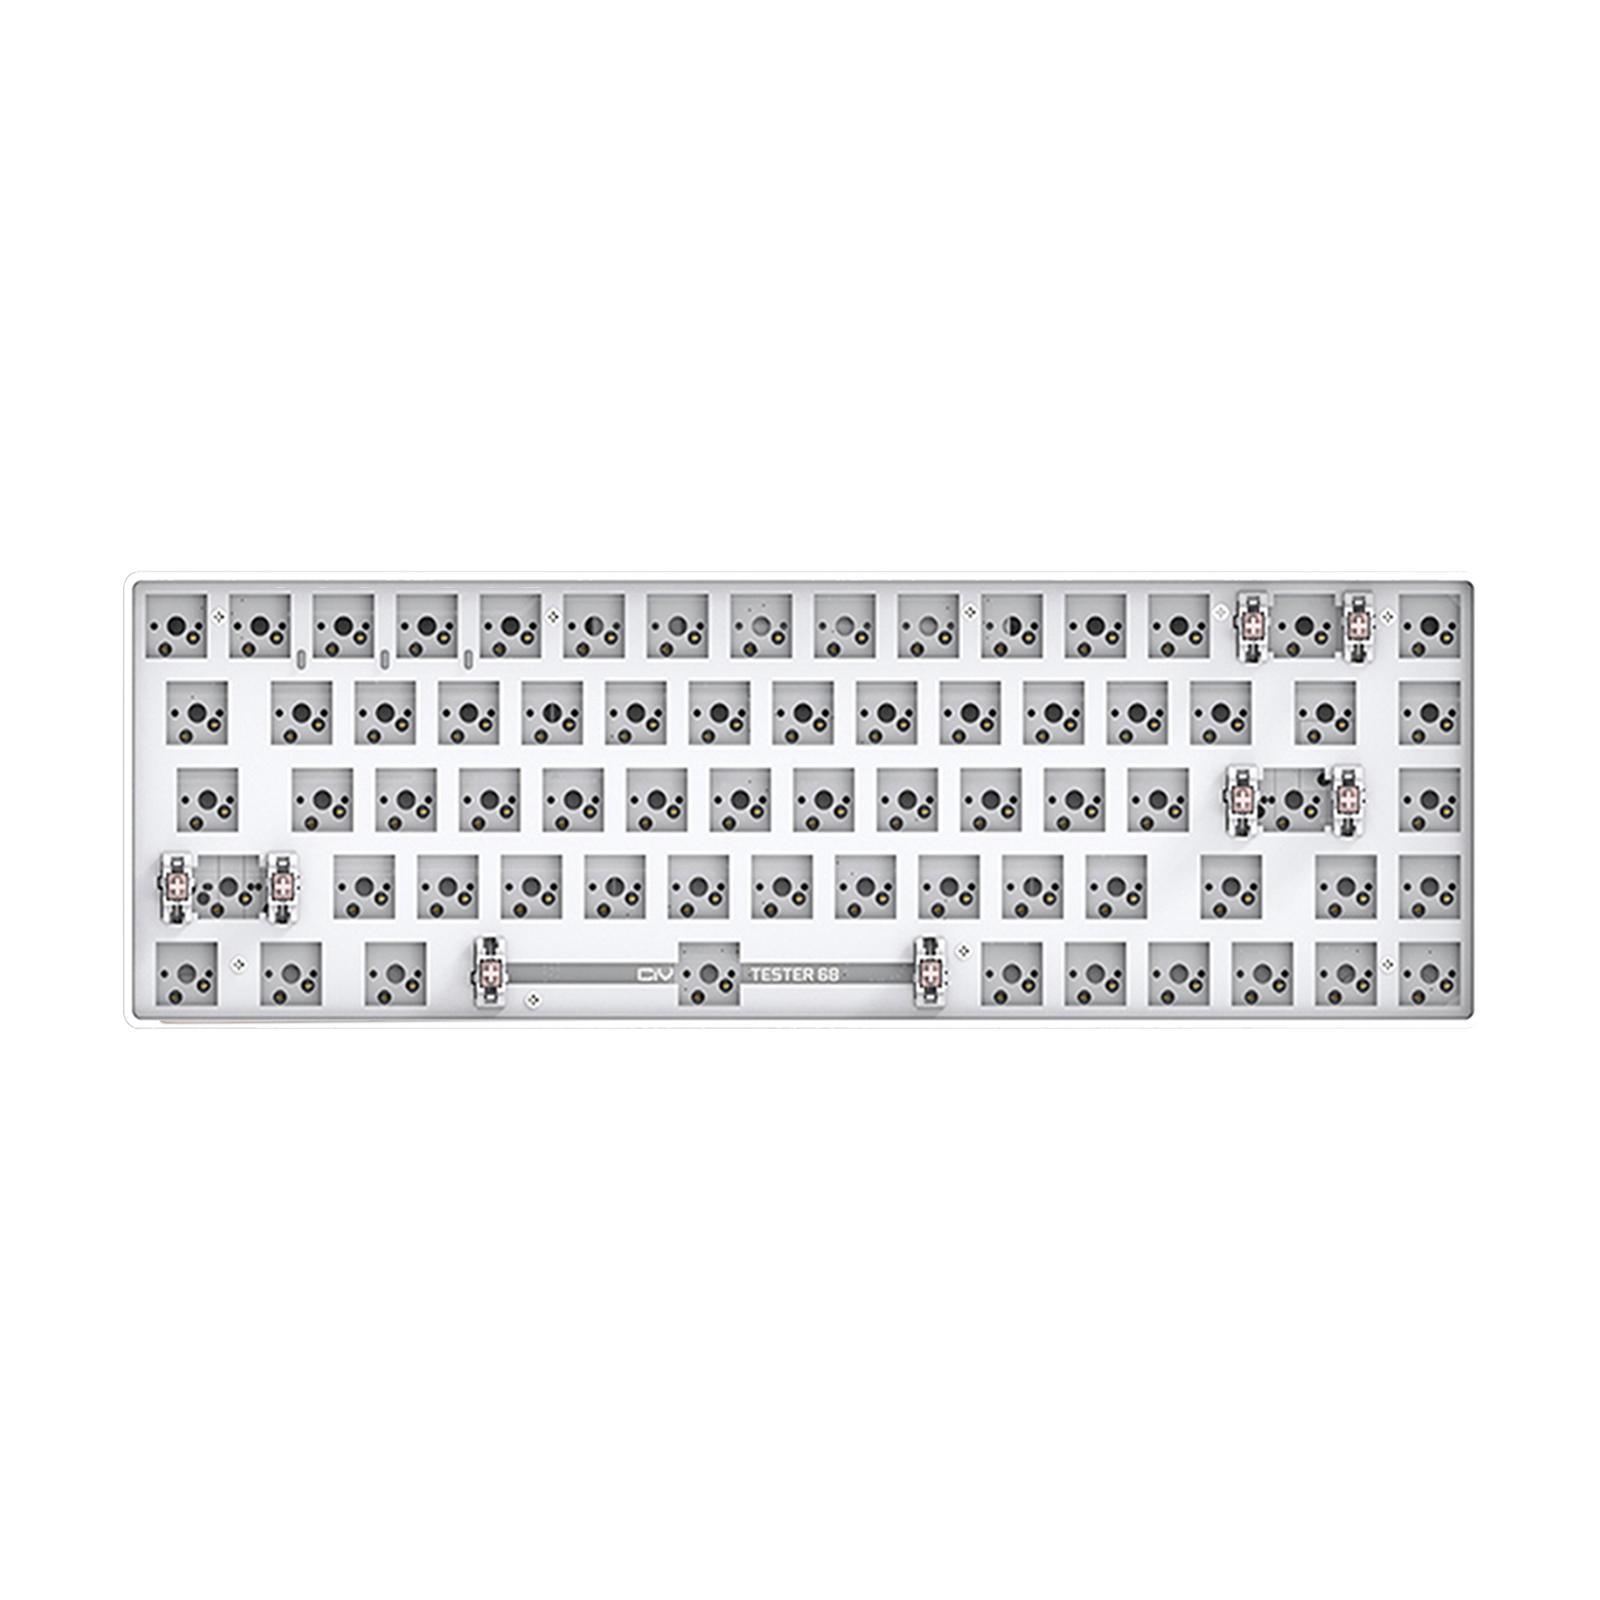 Mechanical Keyboard DIY Kit Hot-Swappable Shaft Base Axis for Windows PC